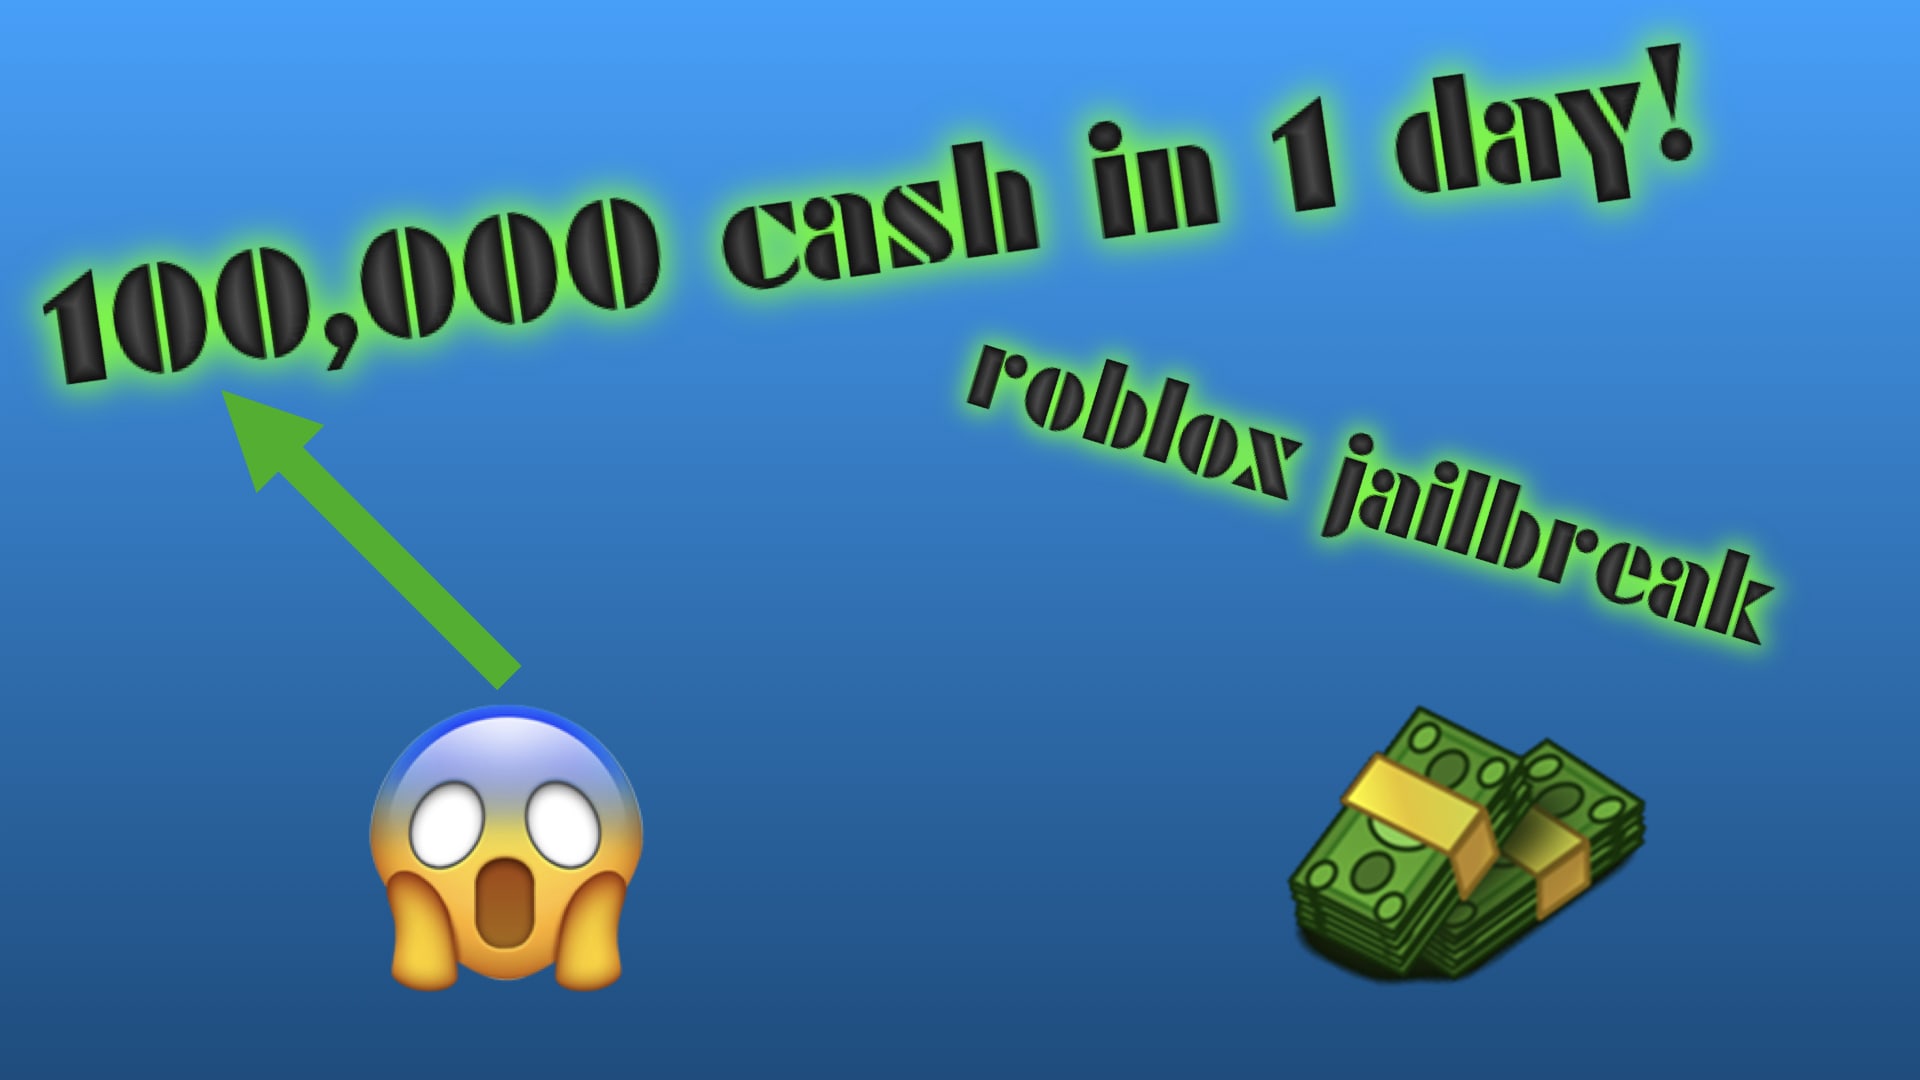 Roblox Jailbreak Cash With Discounts By Brboxer Fiverr - how to give cash to someone in roblox jailbreak